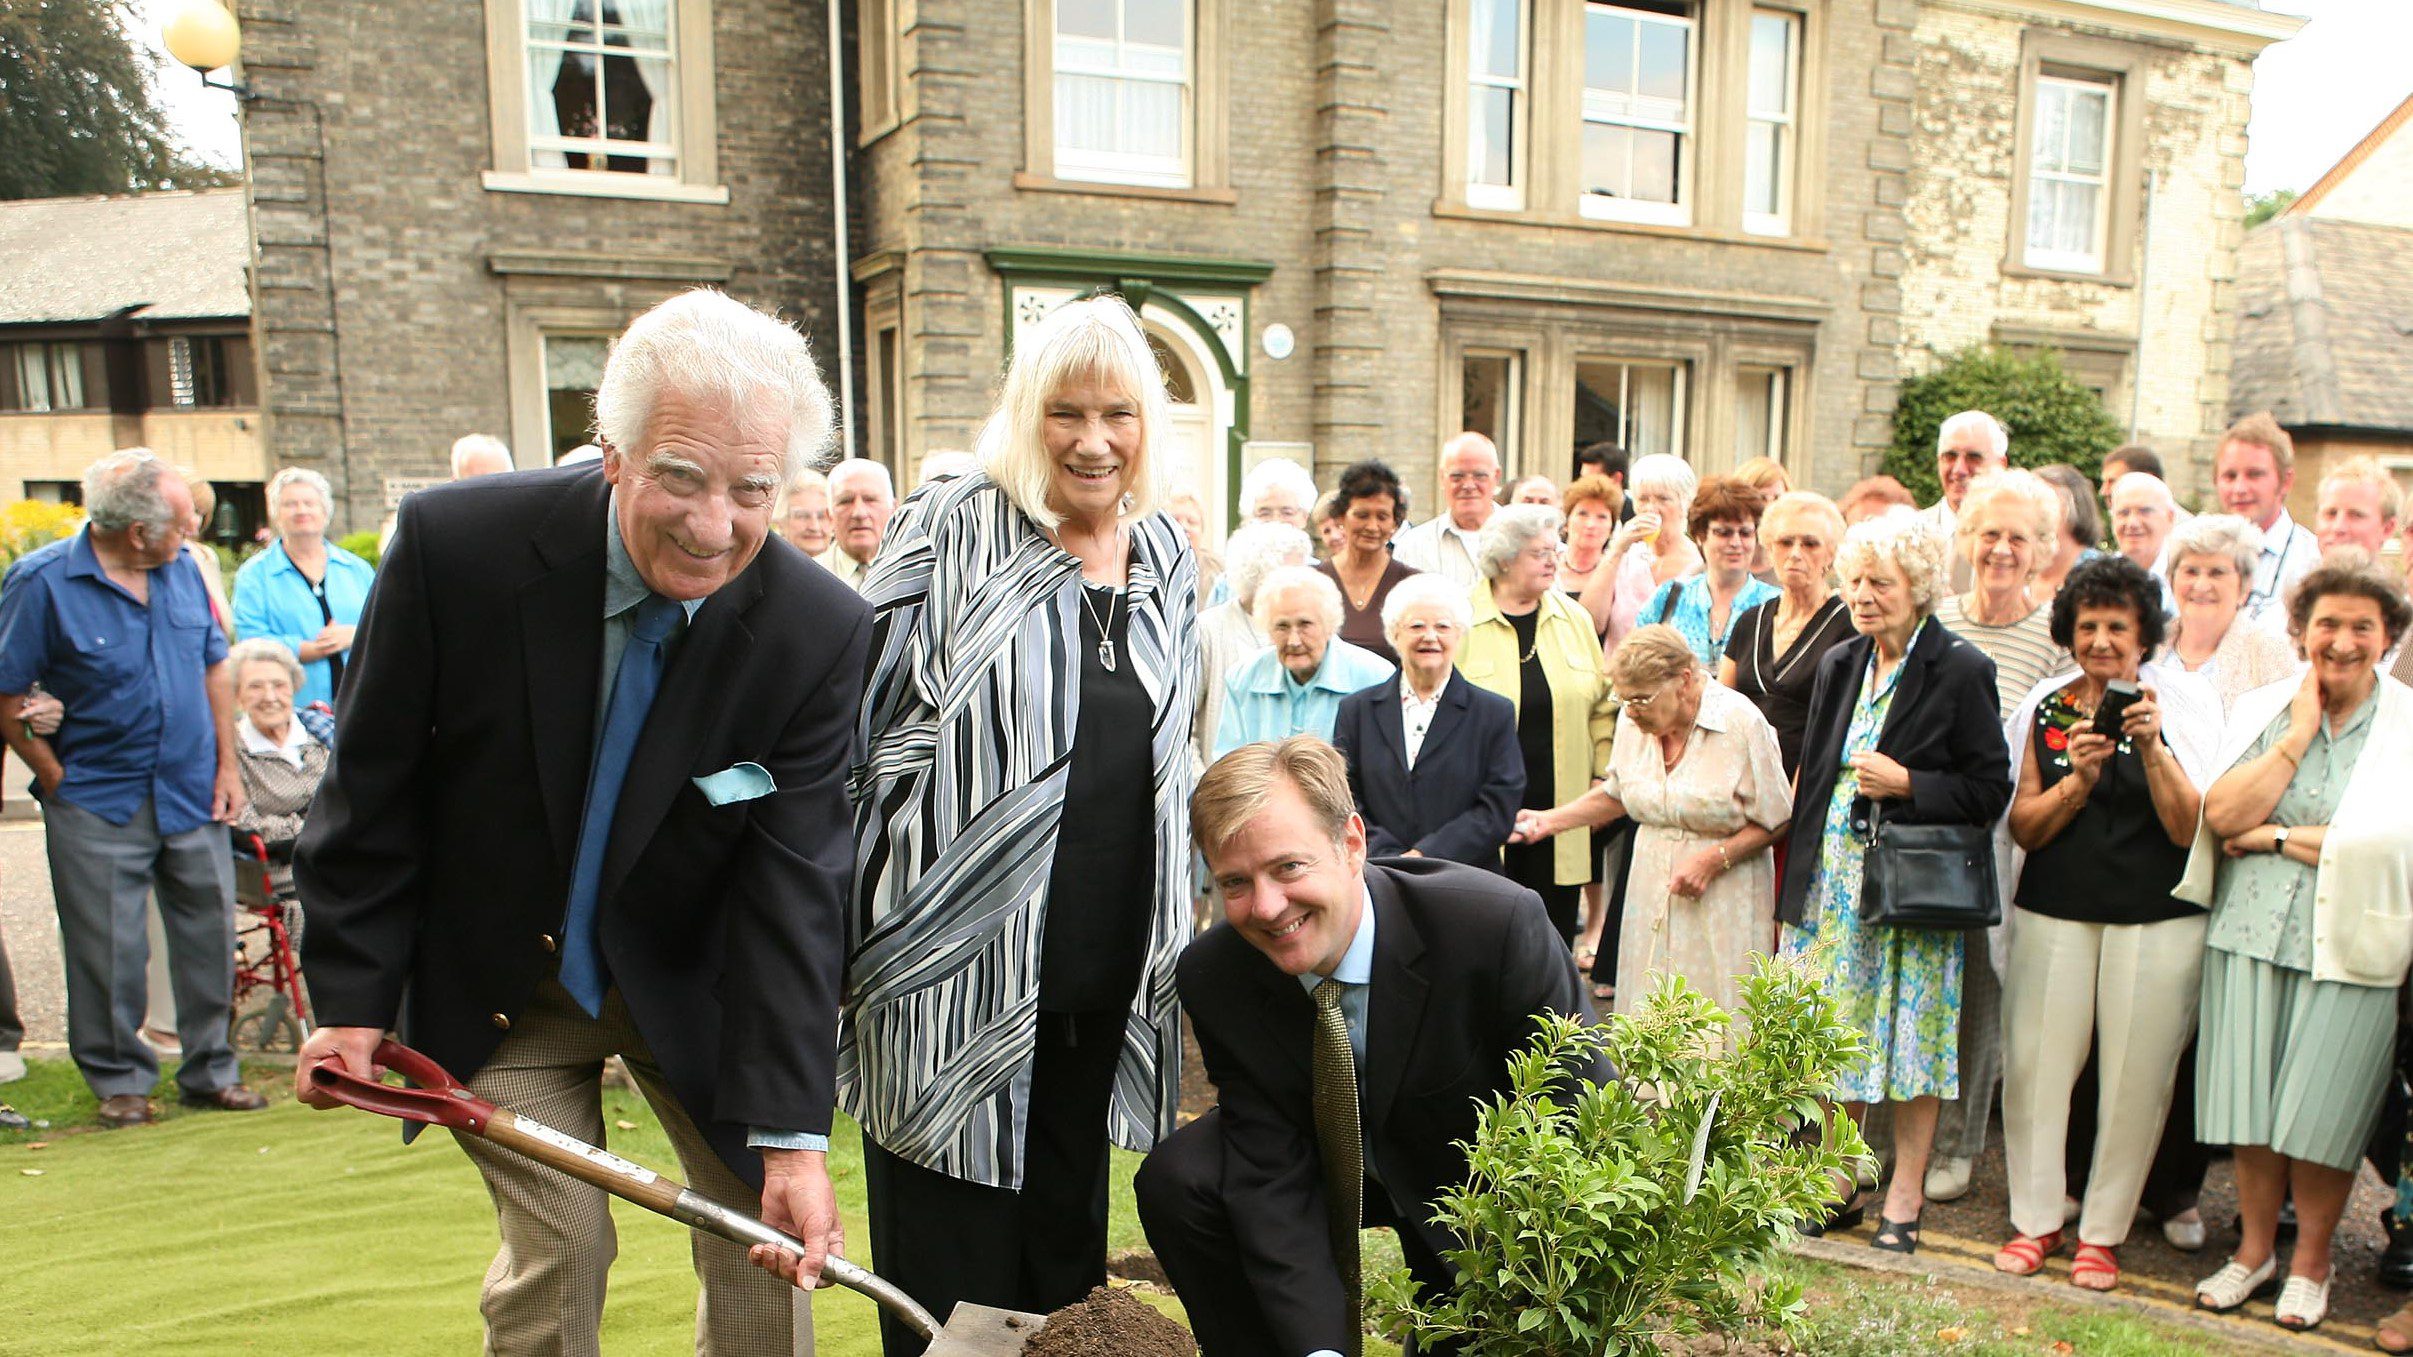 Martin Miller, former Chief Executive of Broadland Housing Association, at The Cedars in 2006